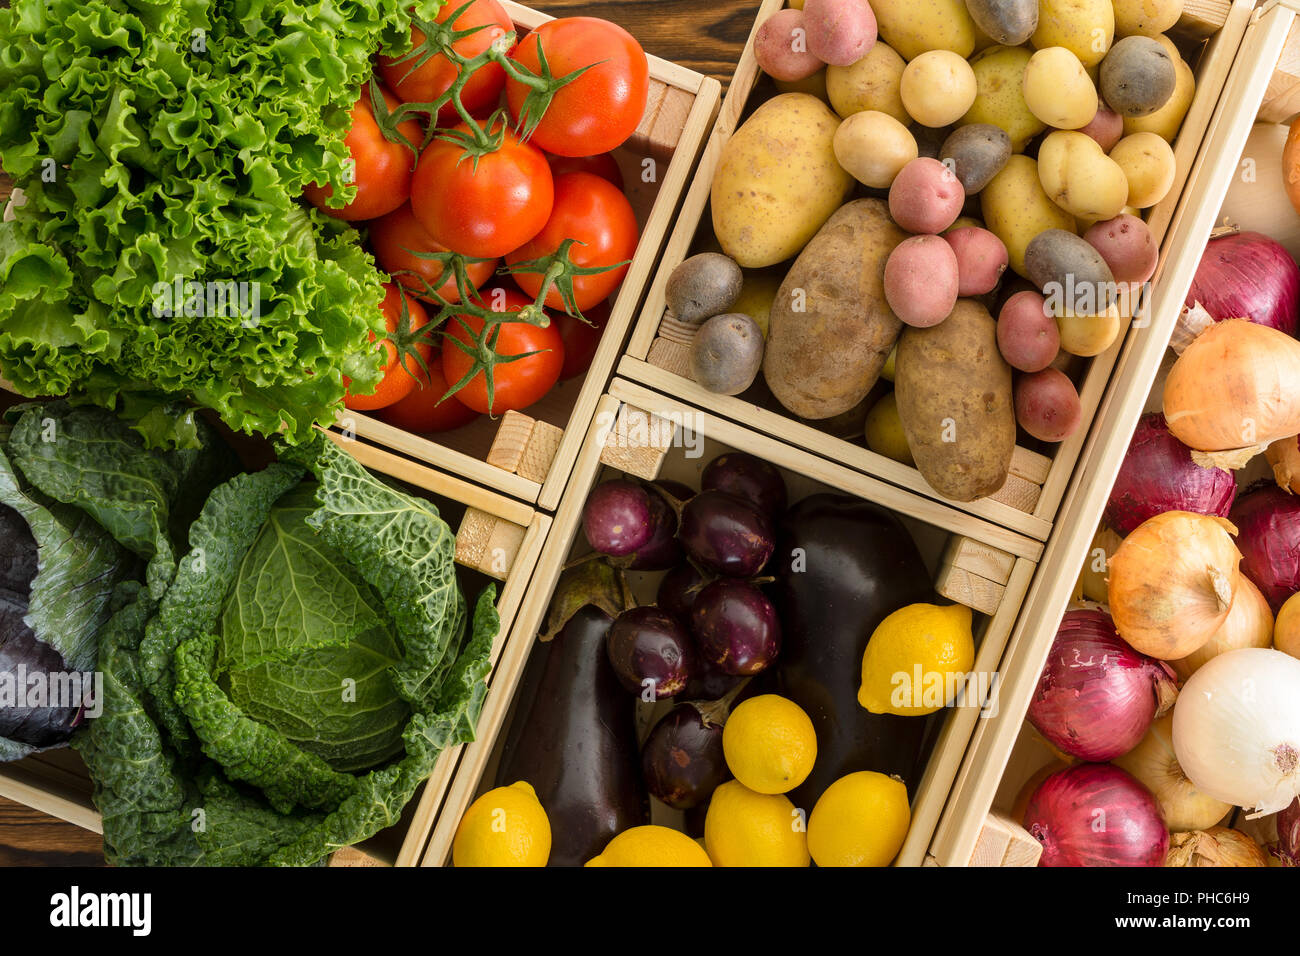 Overhead view on multiple wood crates containing vegetables including potatoes and onions over wooden background Stock Photo